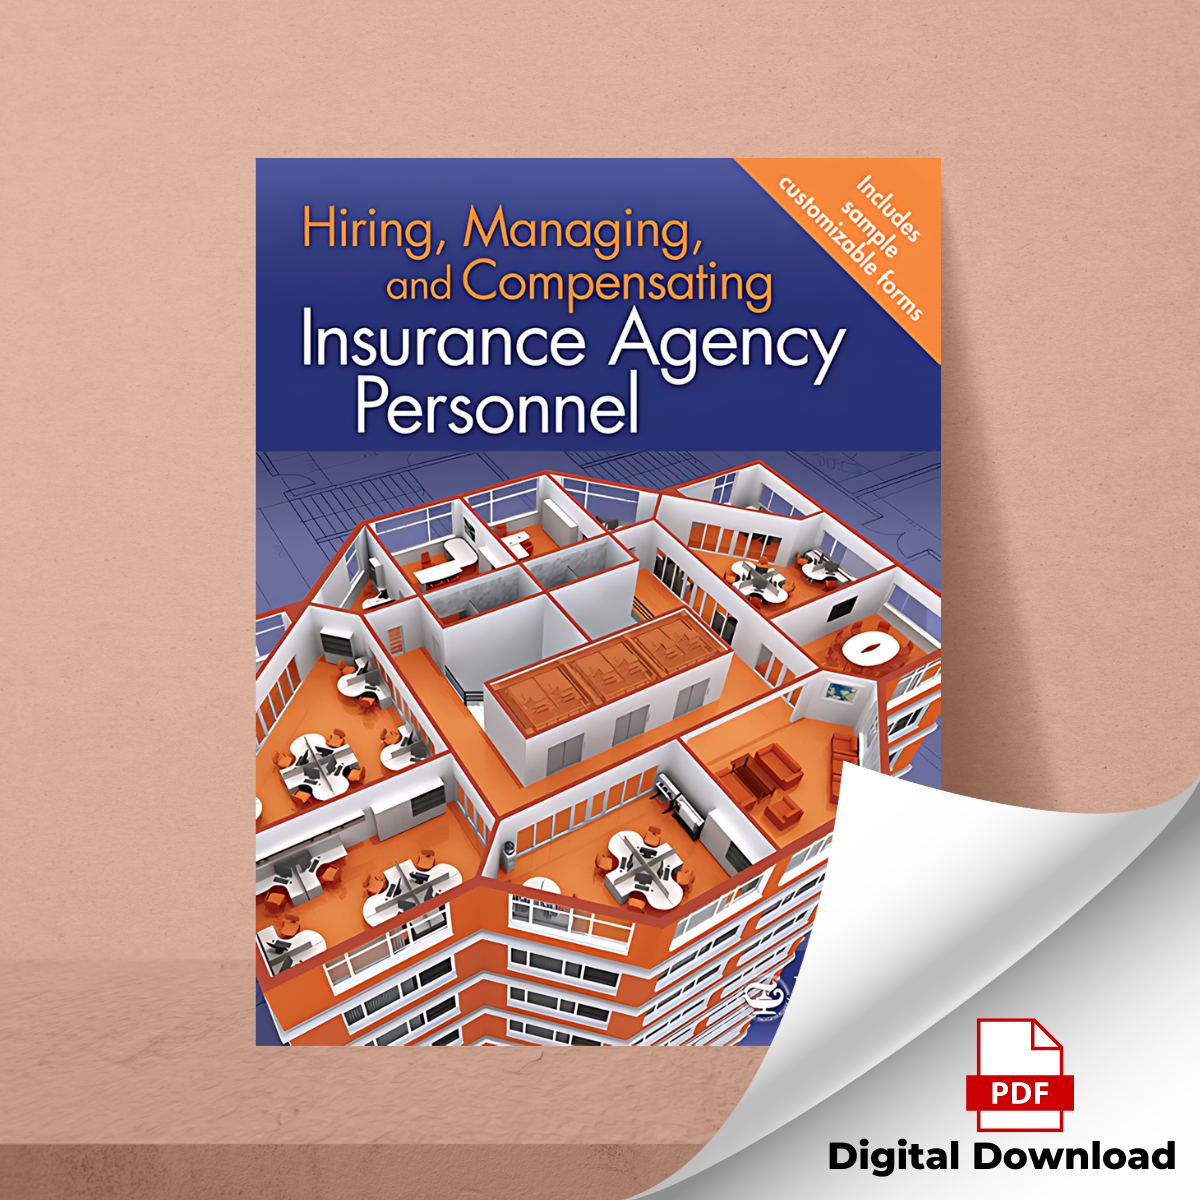 Hiring, Managing, and Compensating Insurance Agency Personnel—Digital PDF